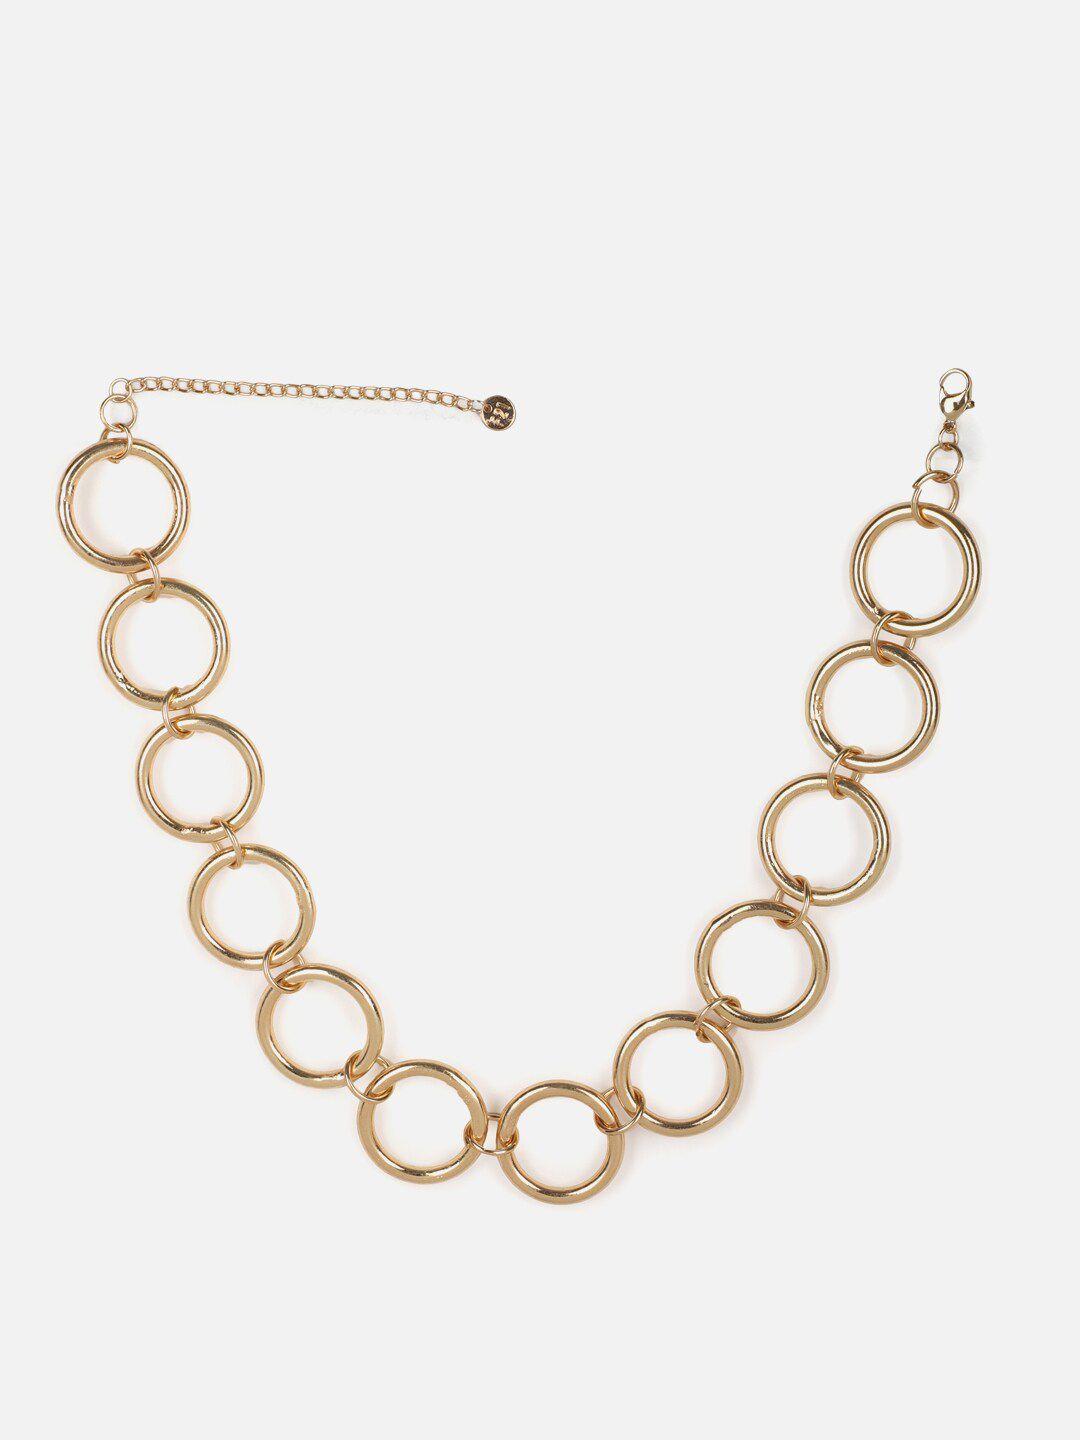 forever-21-women-gold-necklace-and-chains